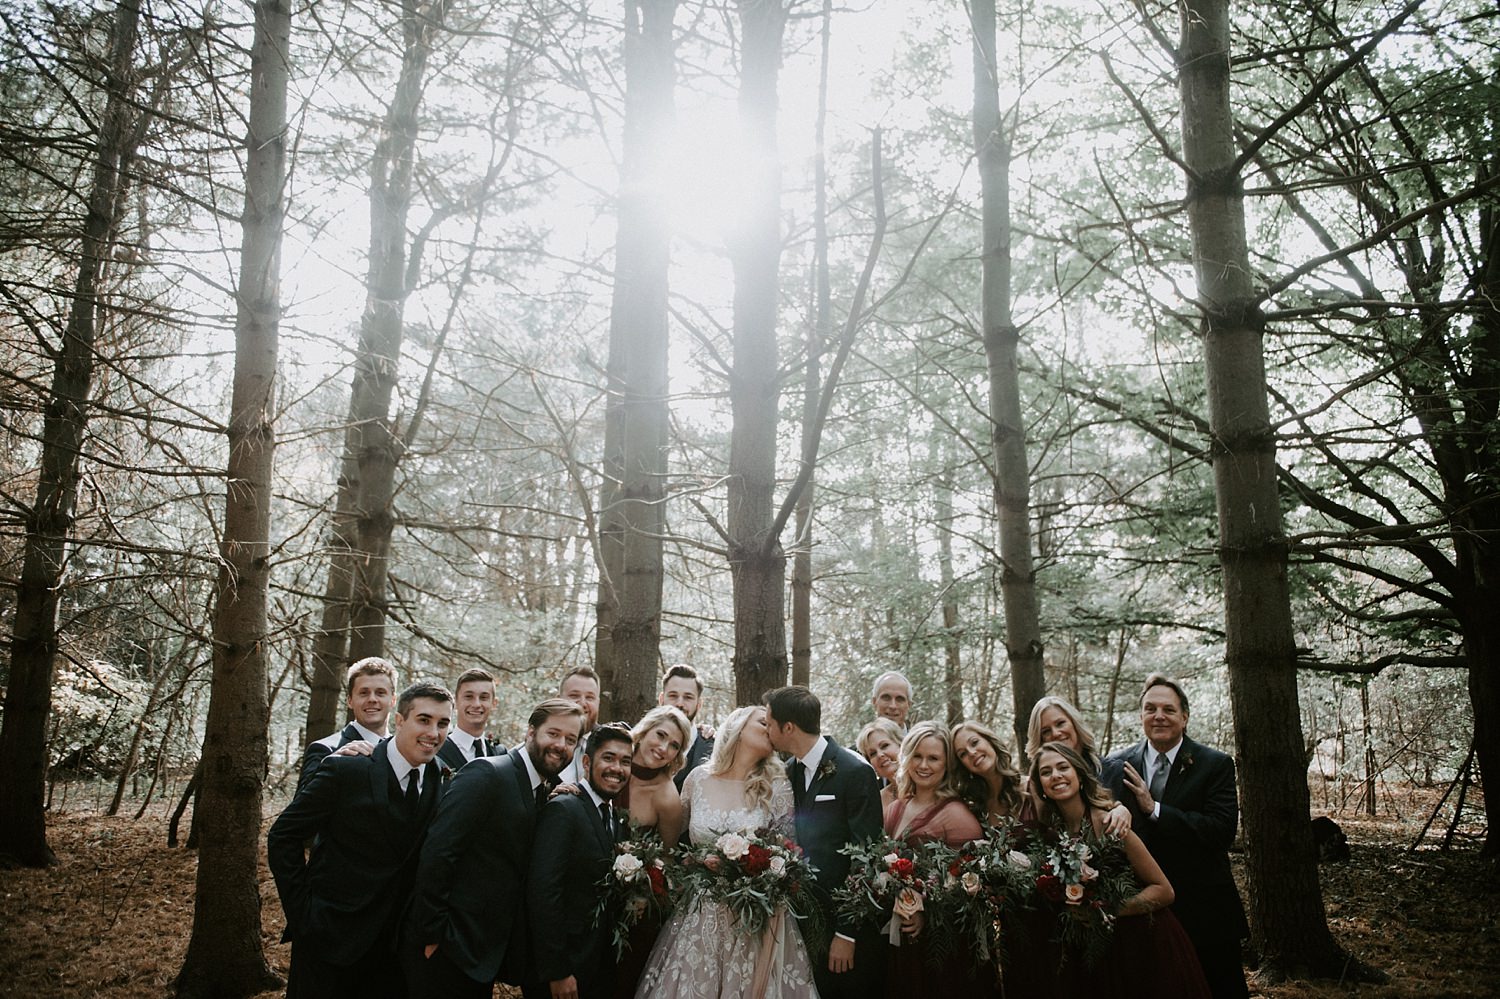 Rustic bridal party at The Webb Barn in Wethersfield, CT